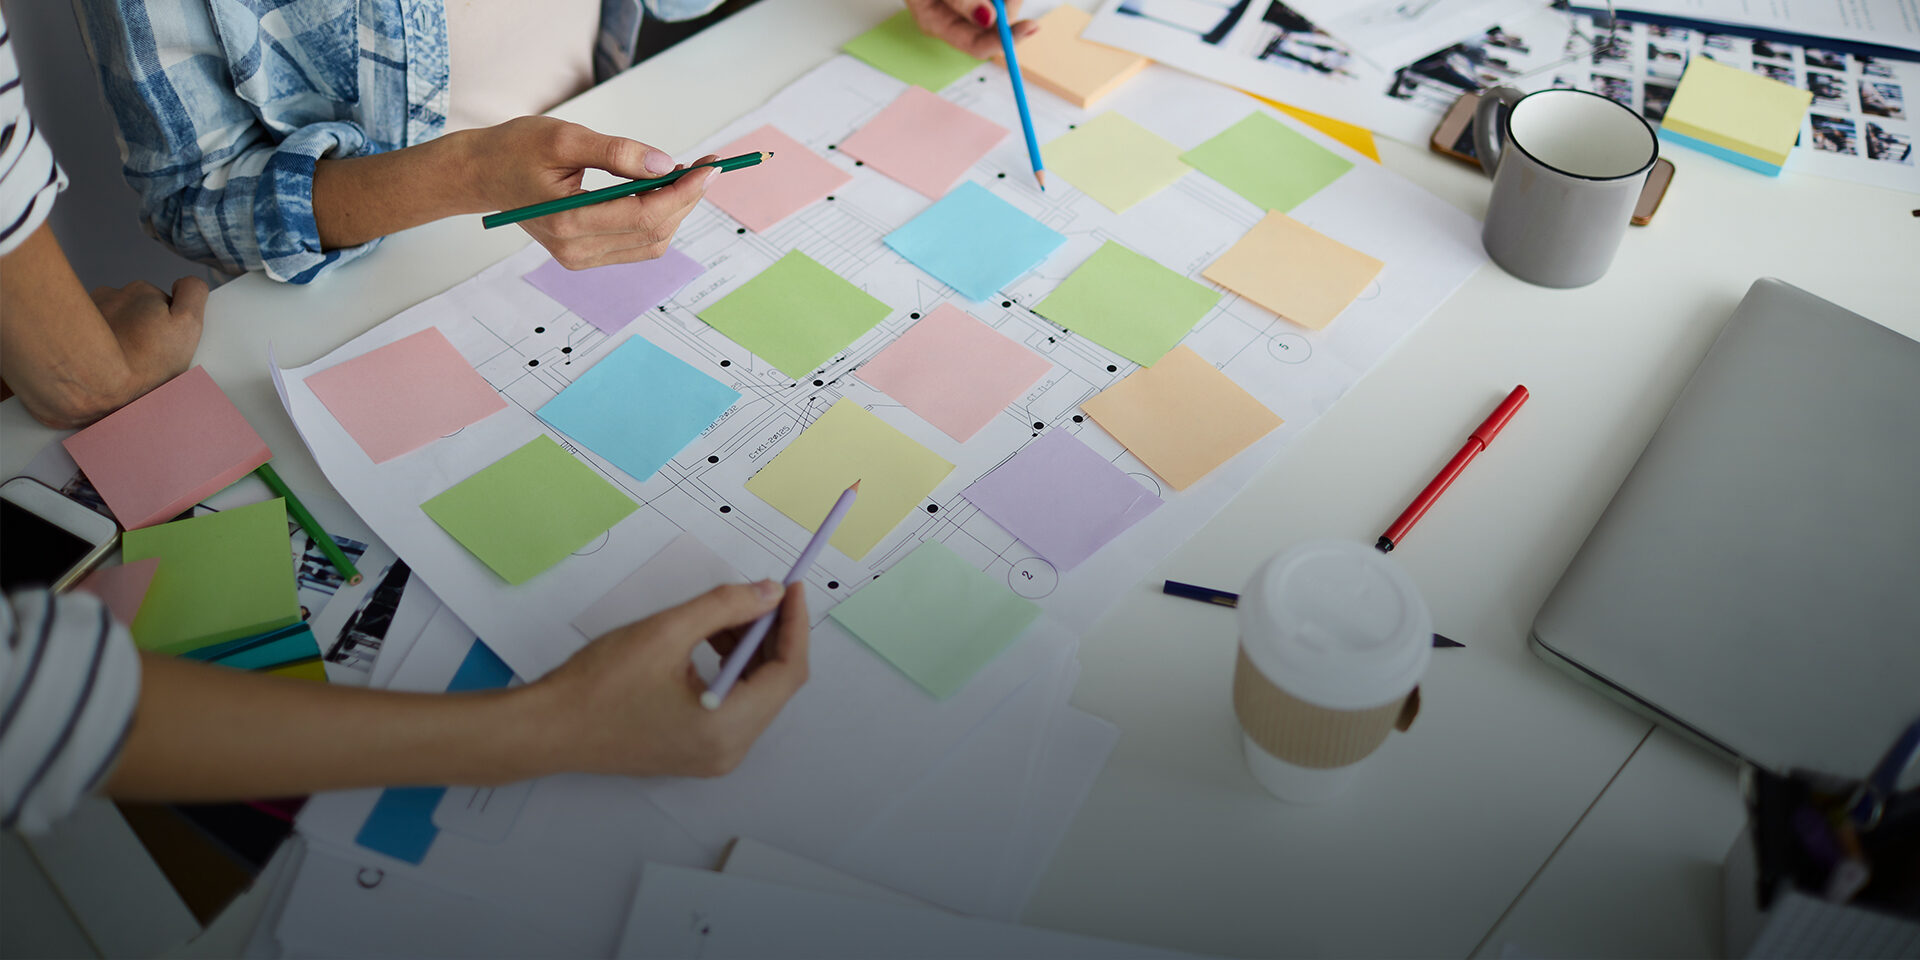 Image of two people working on a document covered with sticky notes on a table.